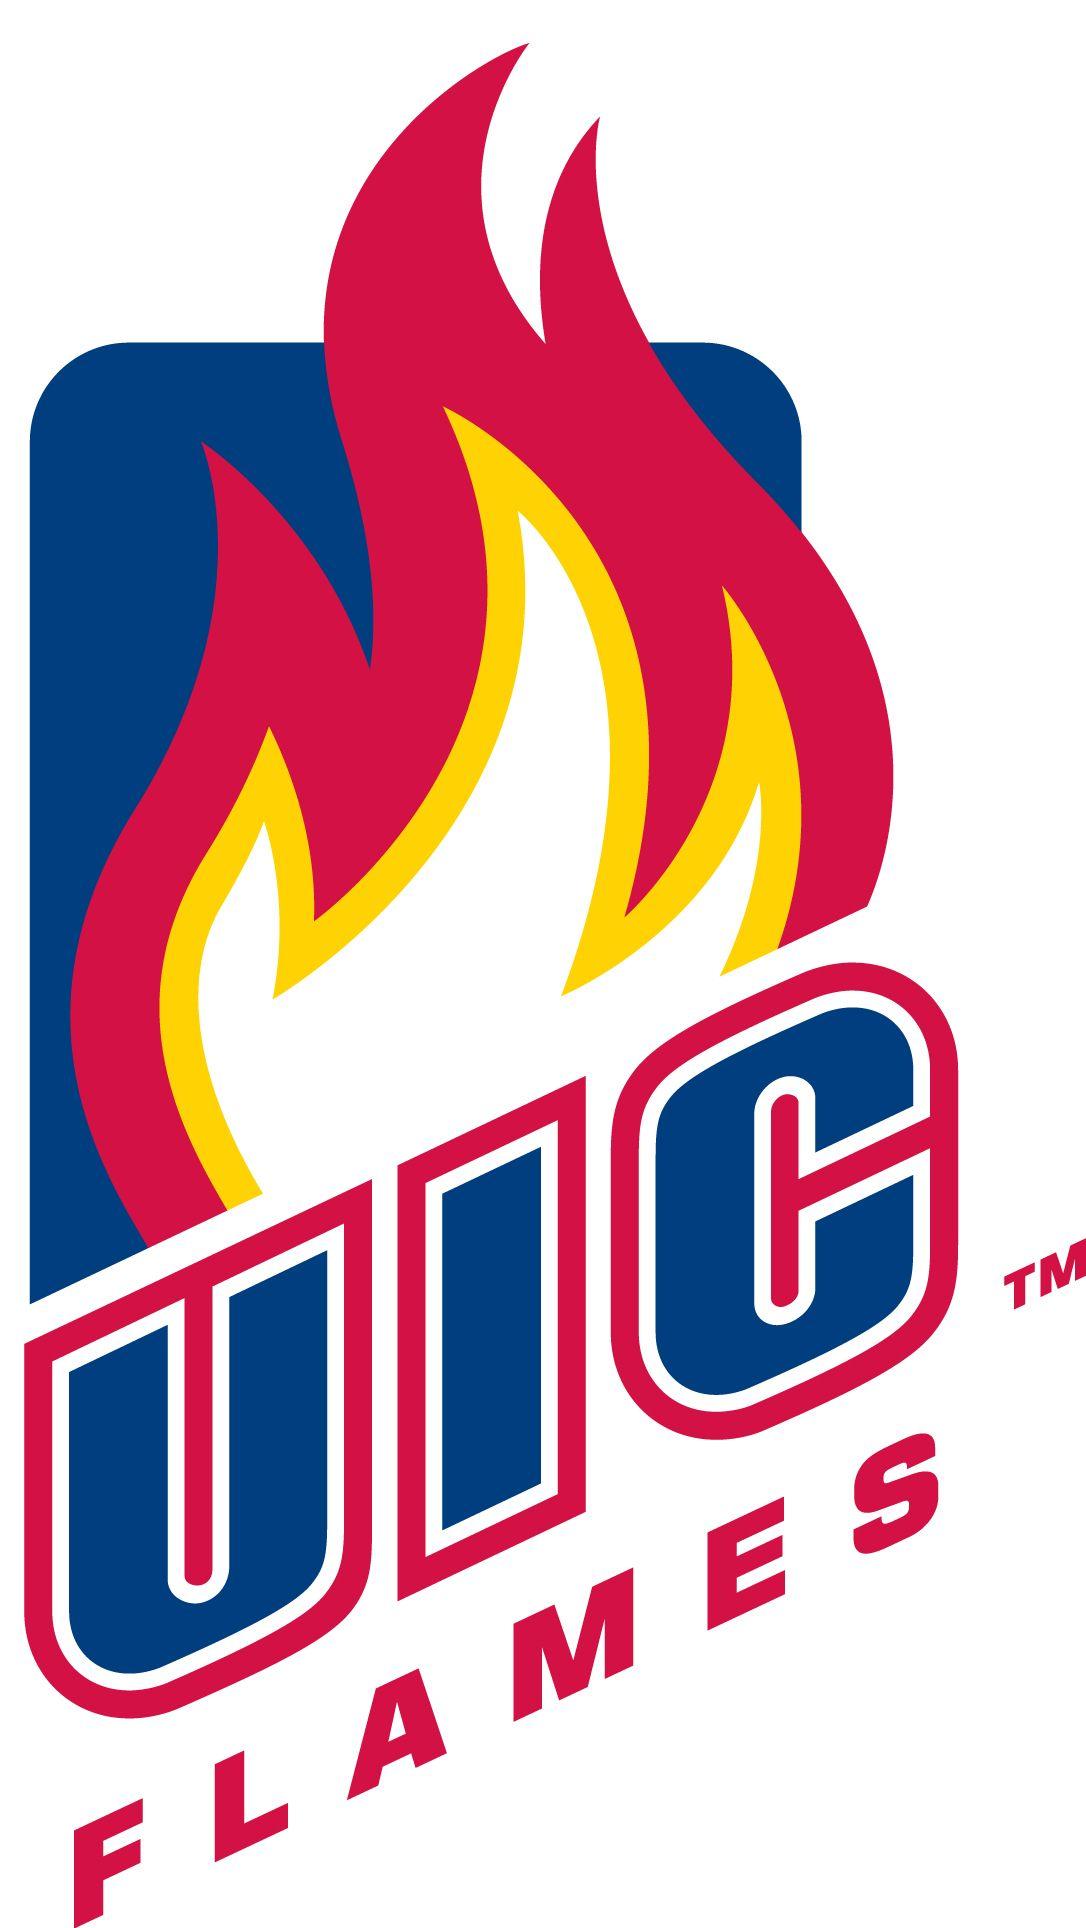 UIC Logo - The University Of Illinois At Chicago, Or UIC, Is A State Funded